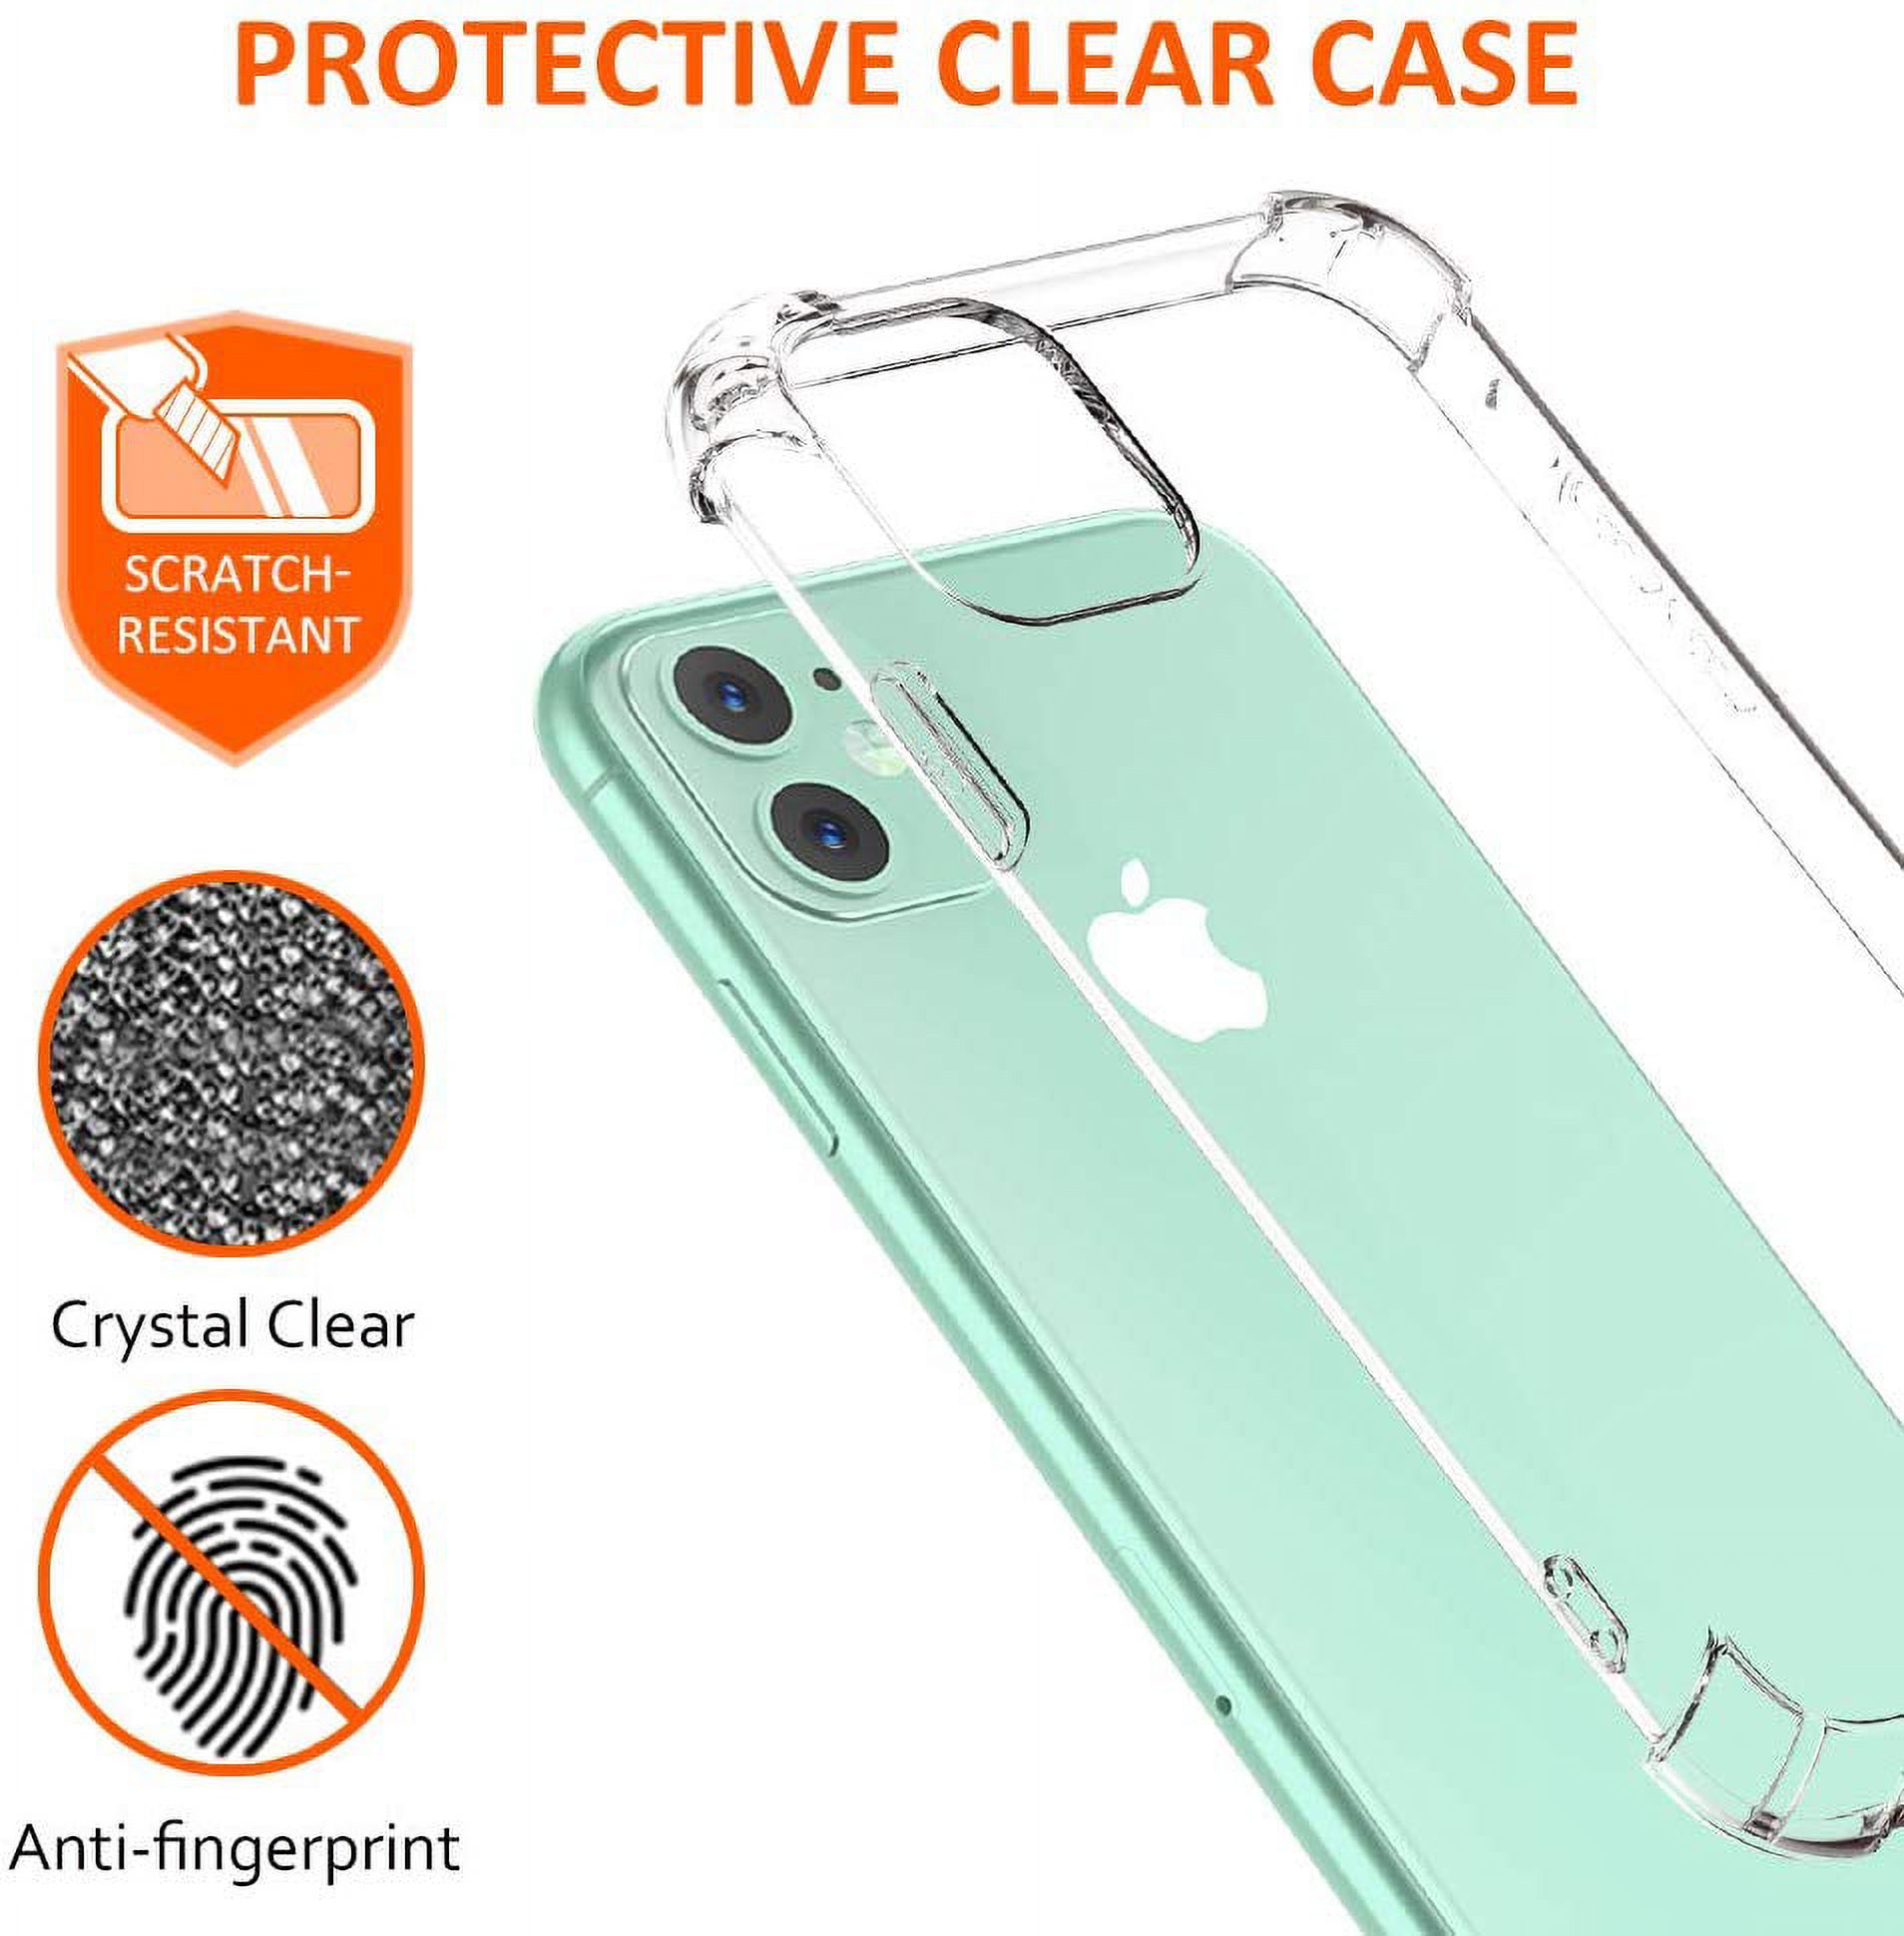 Njjex iPhone 11 / iPhone XR / iPhone 12 Pro Max Case, Njjex iPhone 11 Crystal Clear Shock Absorption Technology Bumper Soft TPU Cover Case For Apple iPhone 11, 12 Mini, 12 Pro Max - image 4 of 6